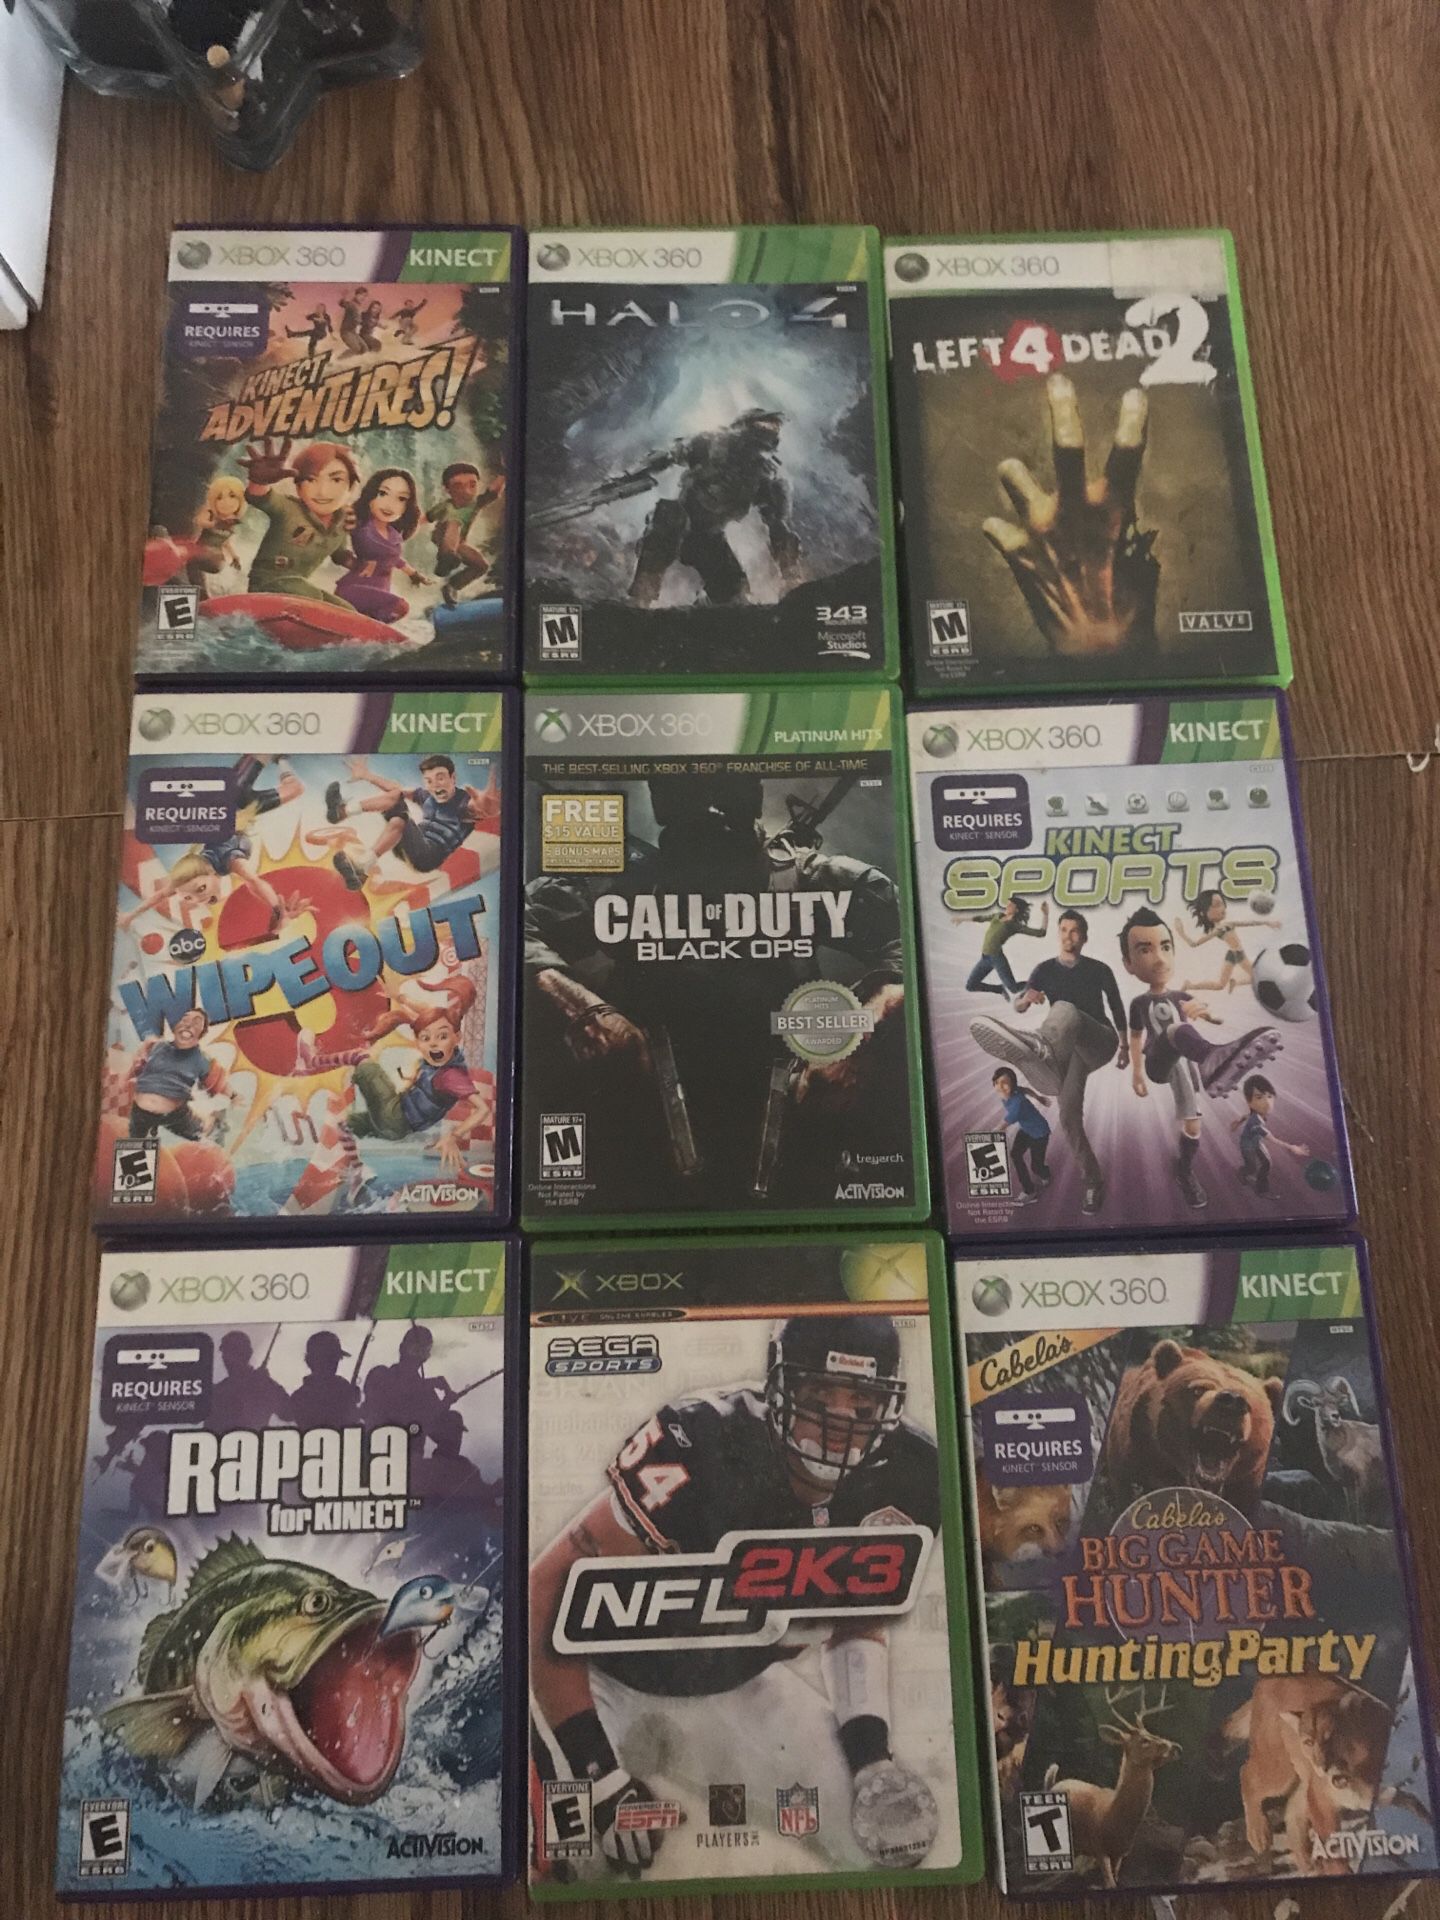 Xbox 360 games $20 take them all for $20 all 9 for $20